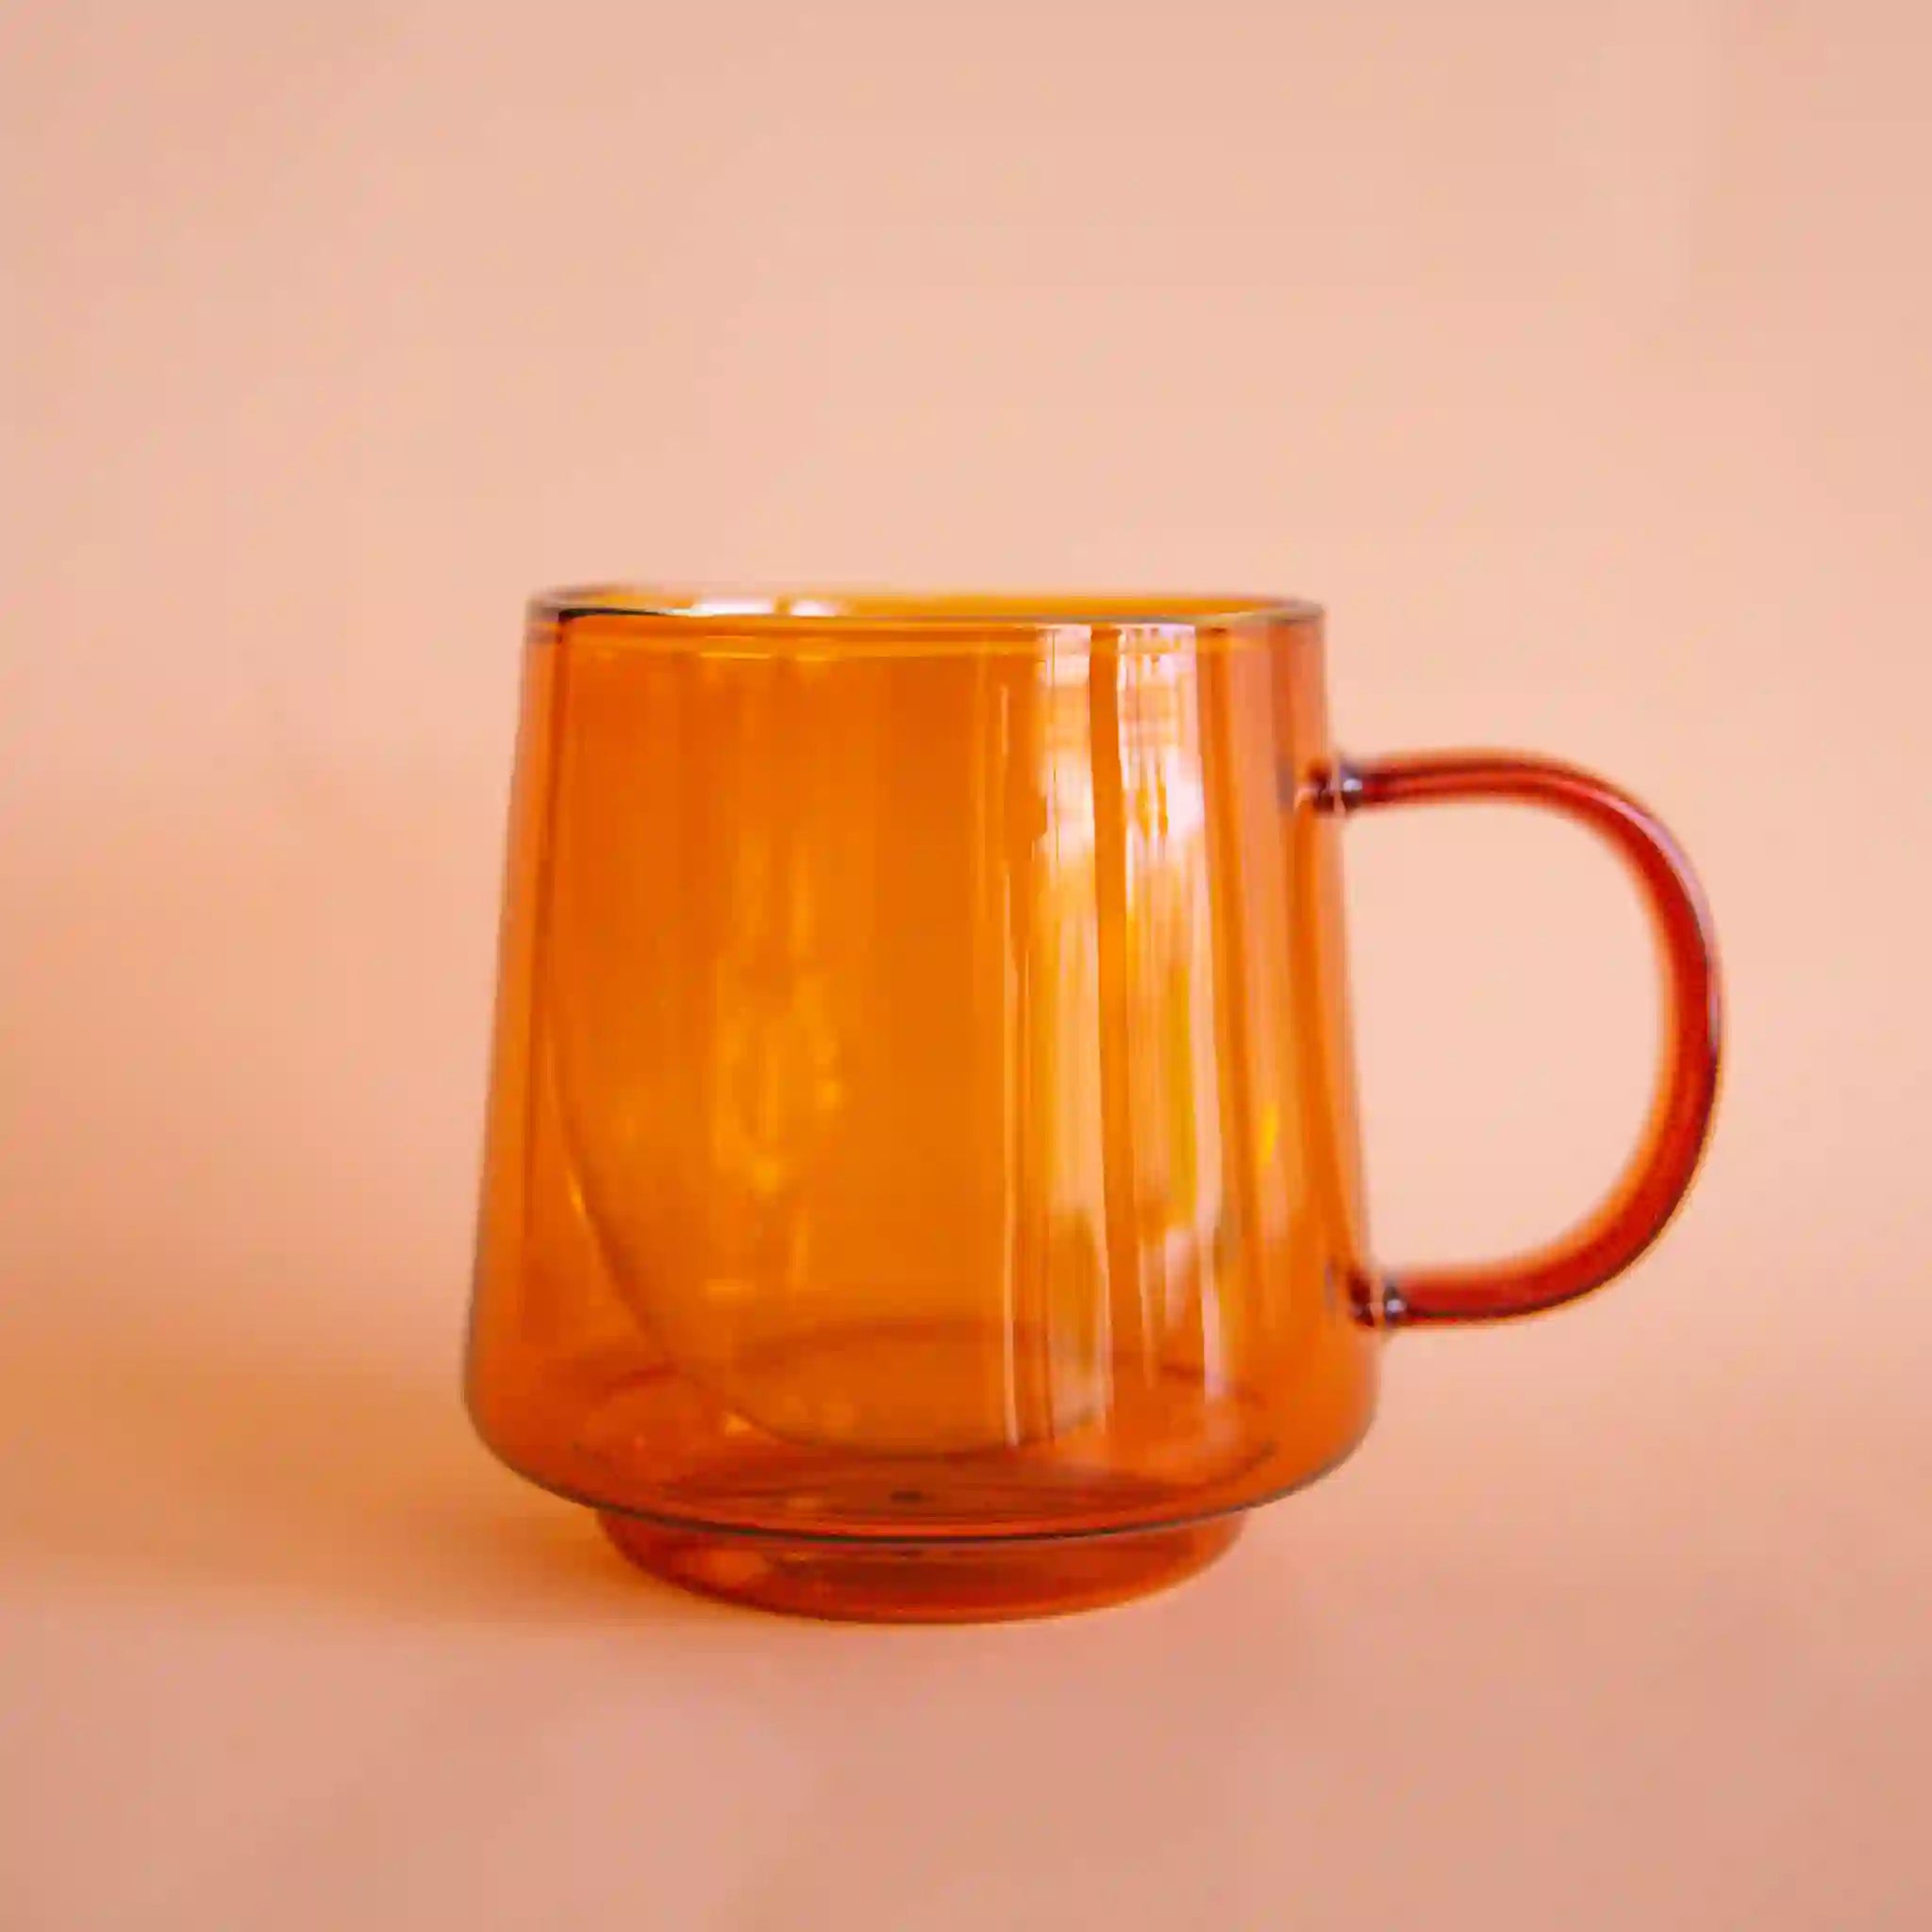 An amber glass mug featuring a double wall detail that keeps drinks insulated for longer.